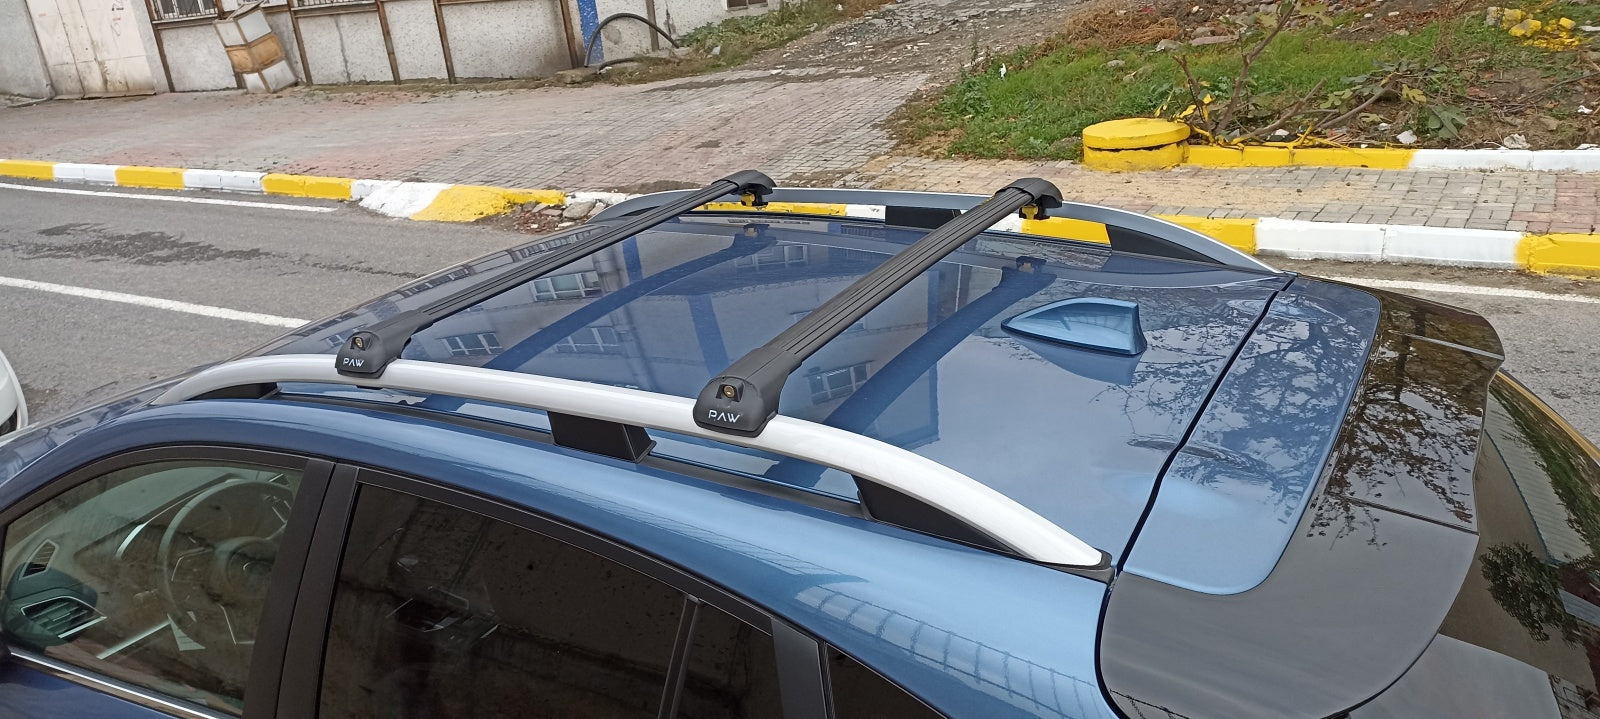 For Mitsubishi Montero 2001-2006 Roof Rack System Carrier Cross Bars Aluminum Lockable High Quality of Metal Bracket Silver